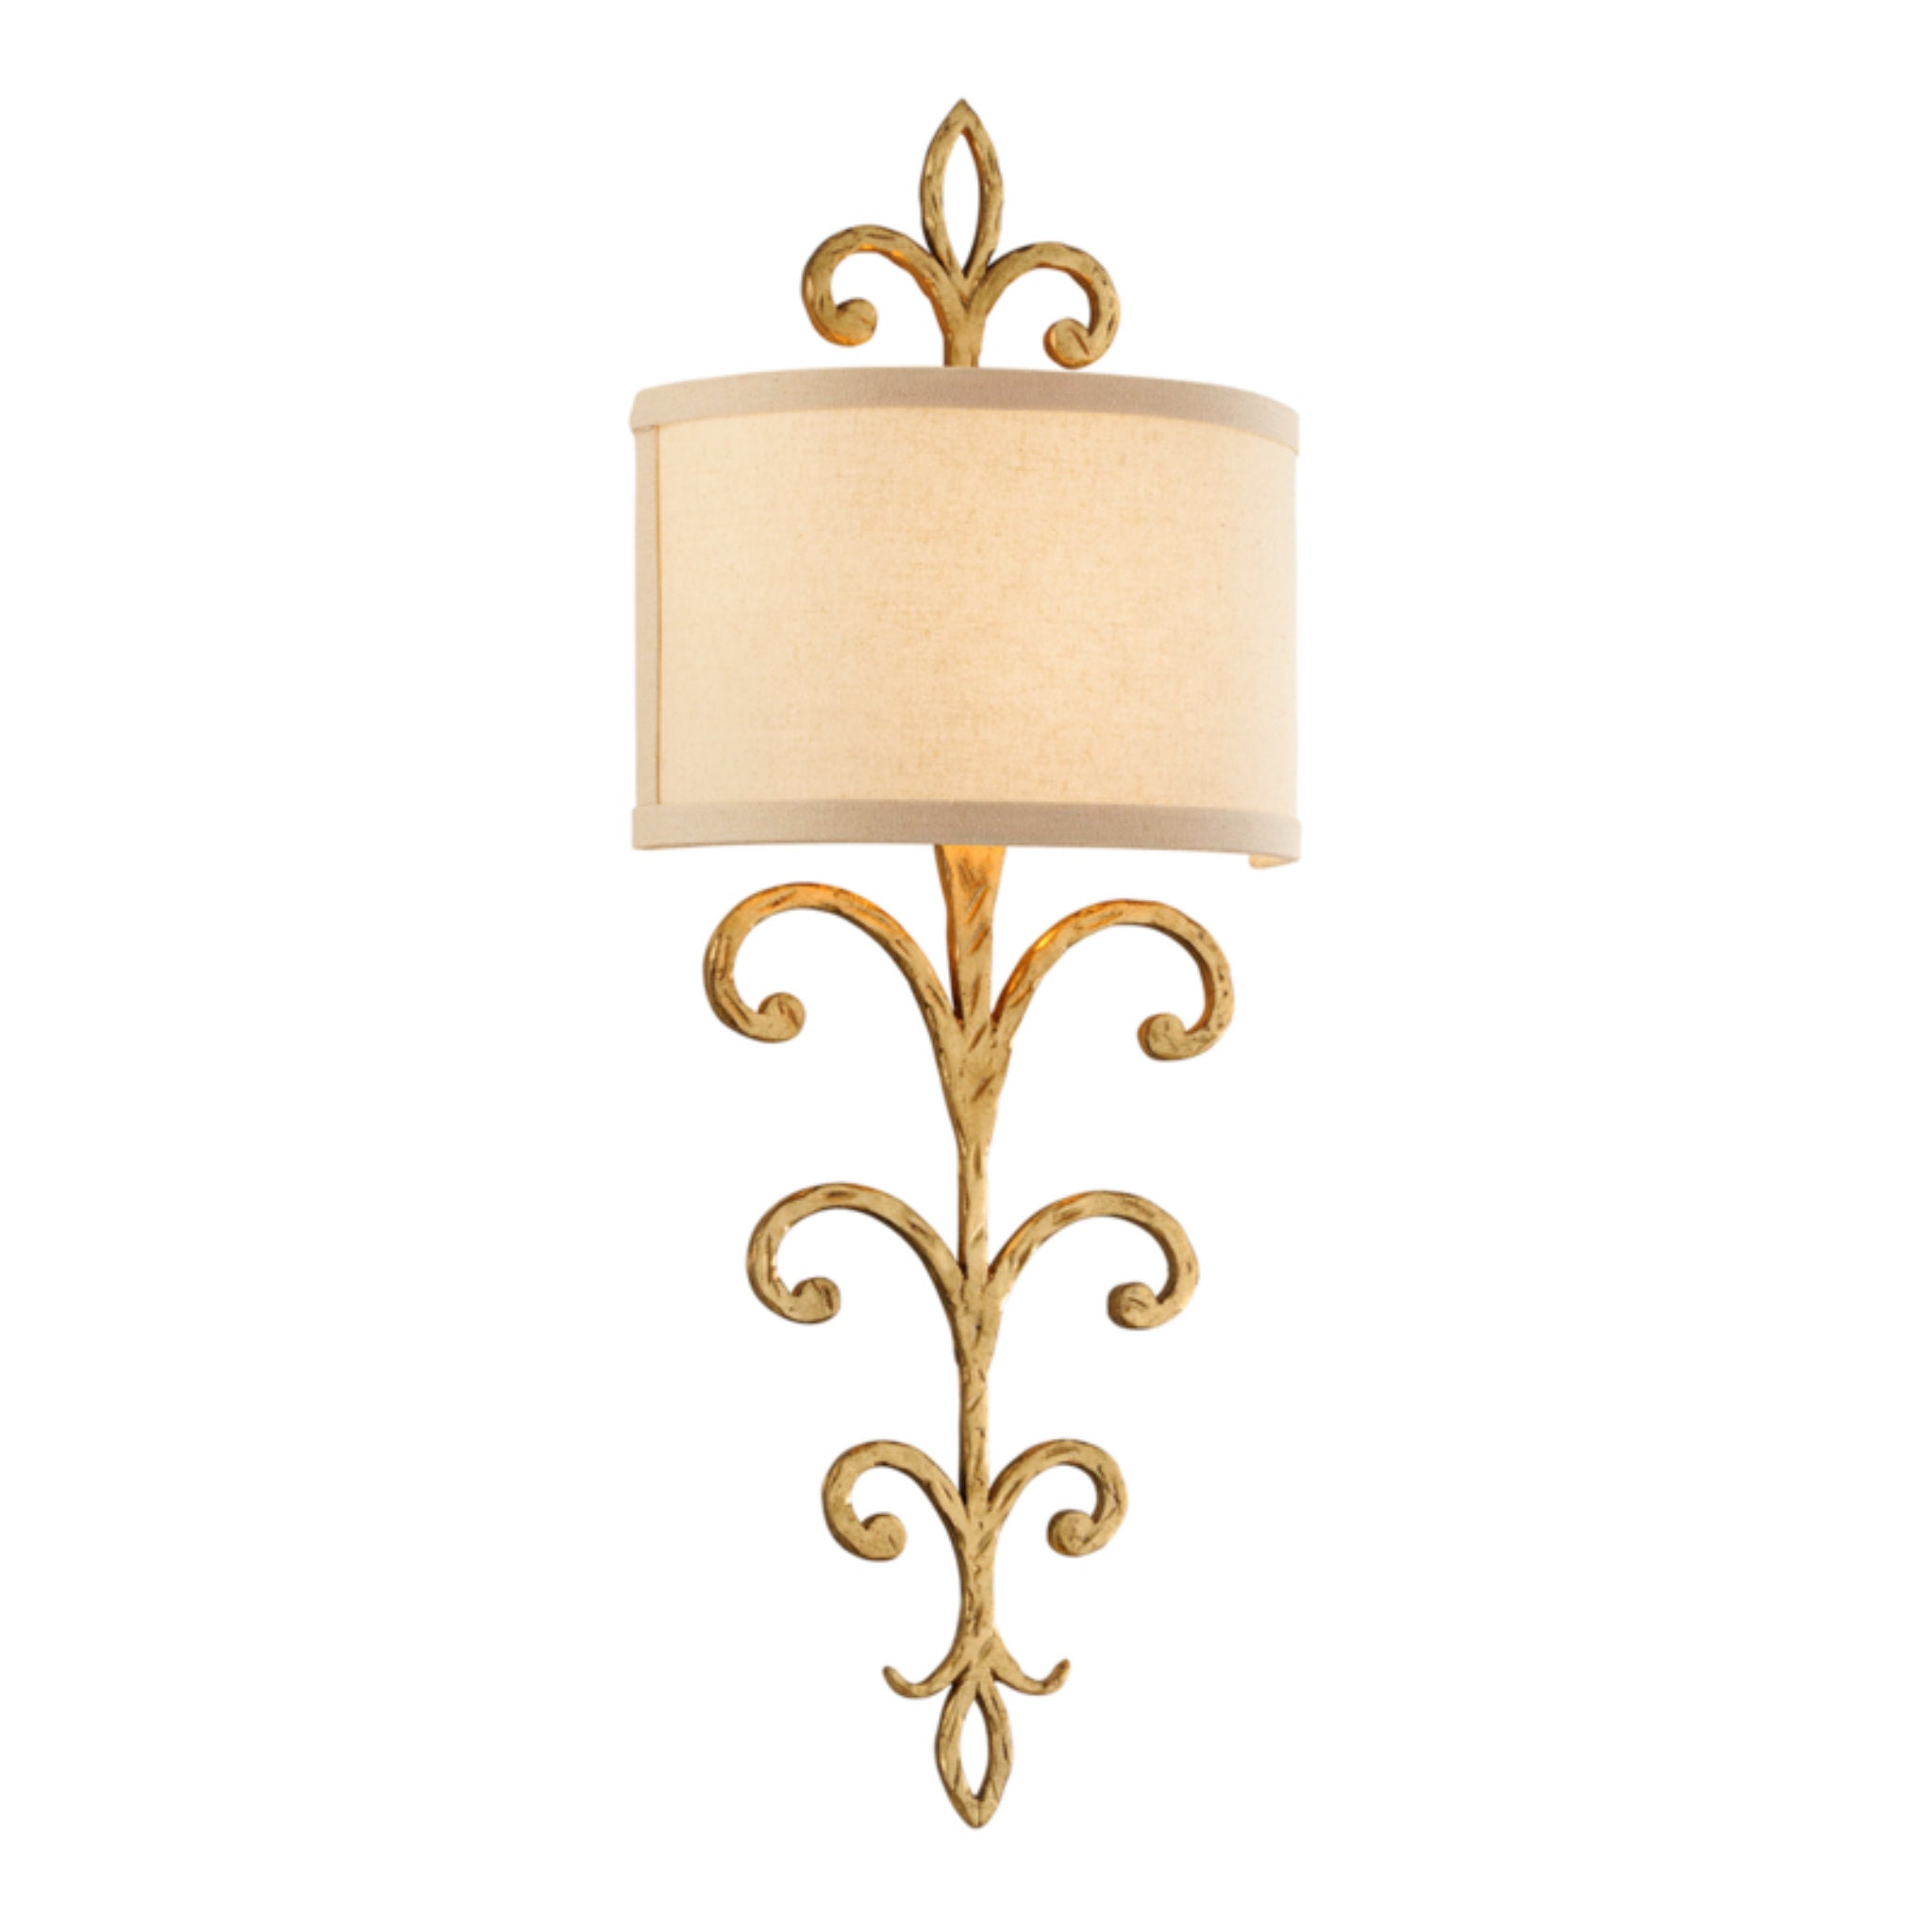 Crawford 2 Light Wall Sconce in Crawford Gold